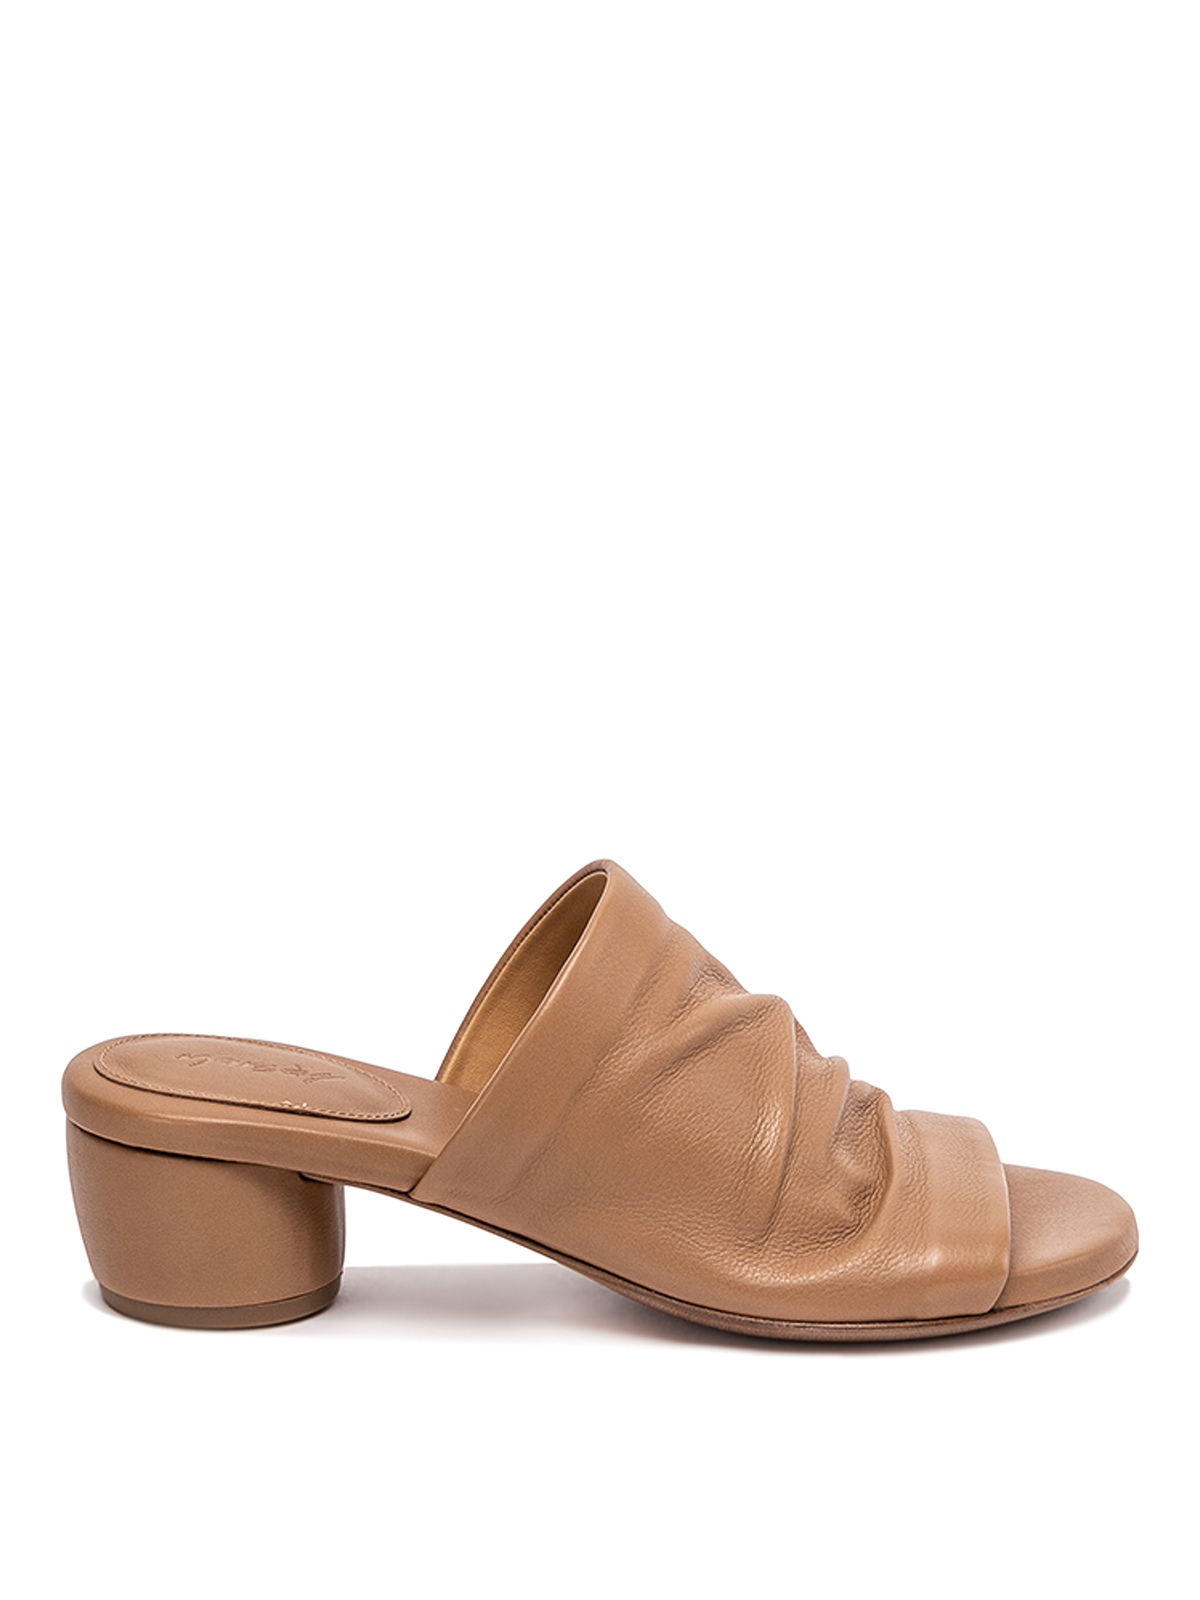 Marsèll Otto Sandals In Curled Effect Leather In Light Brown